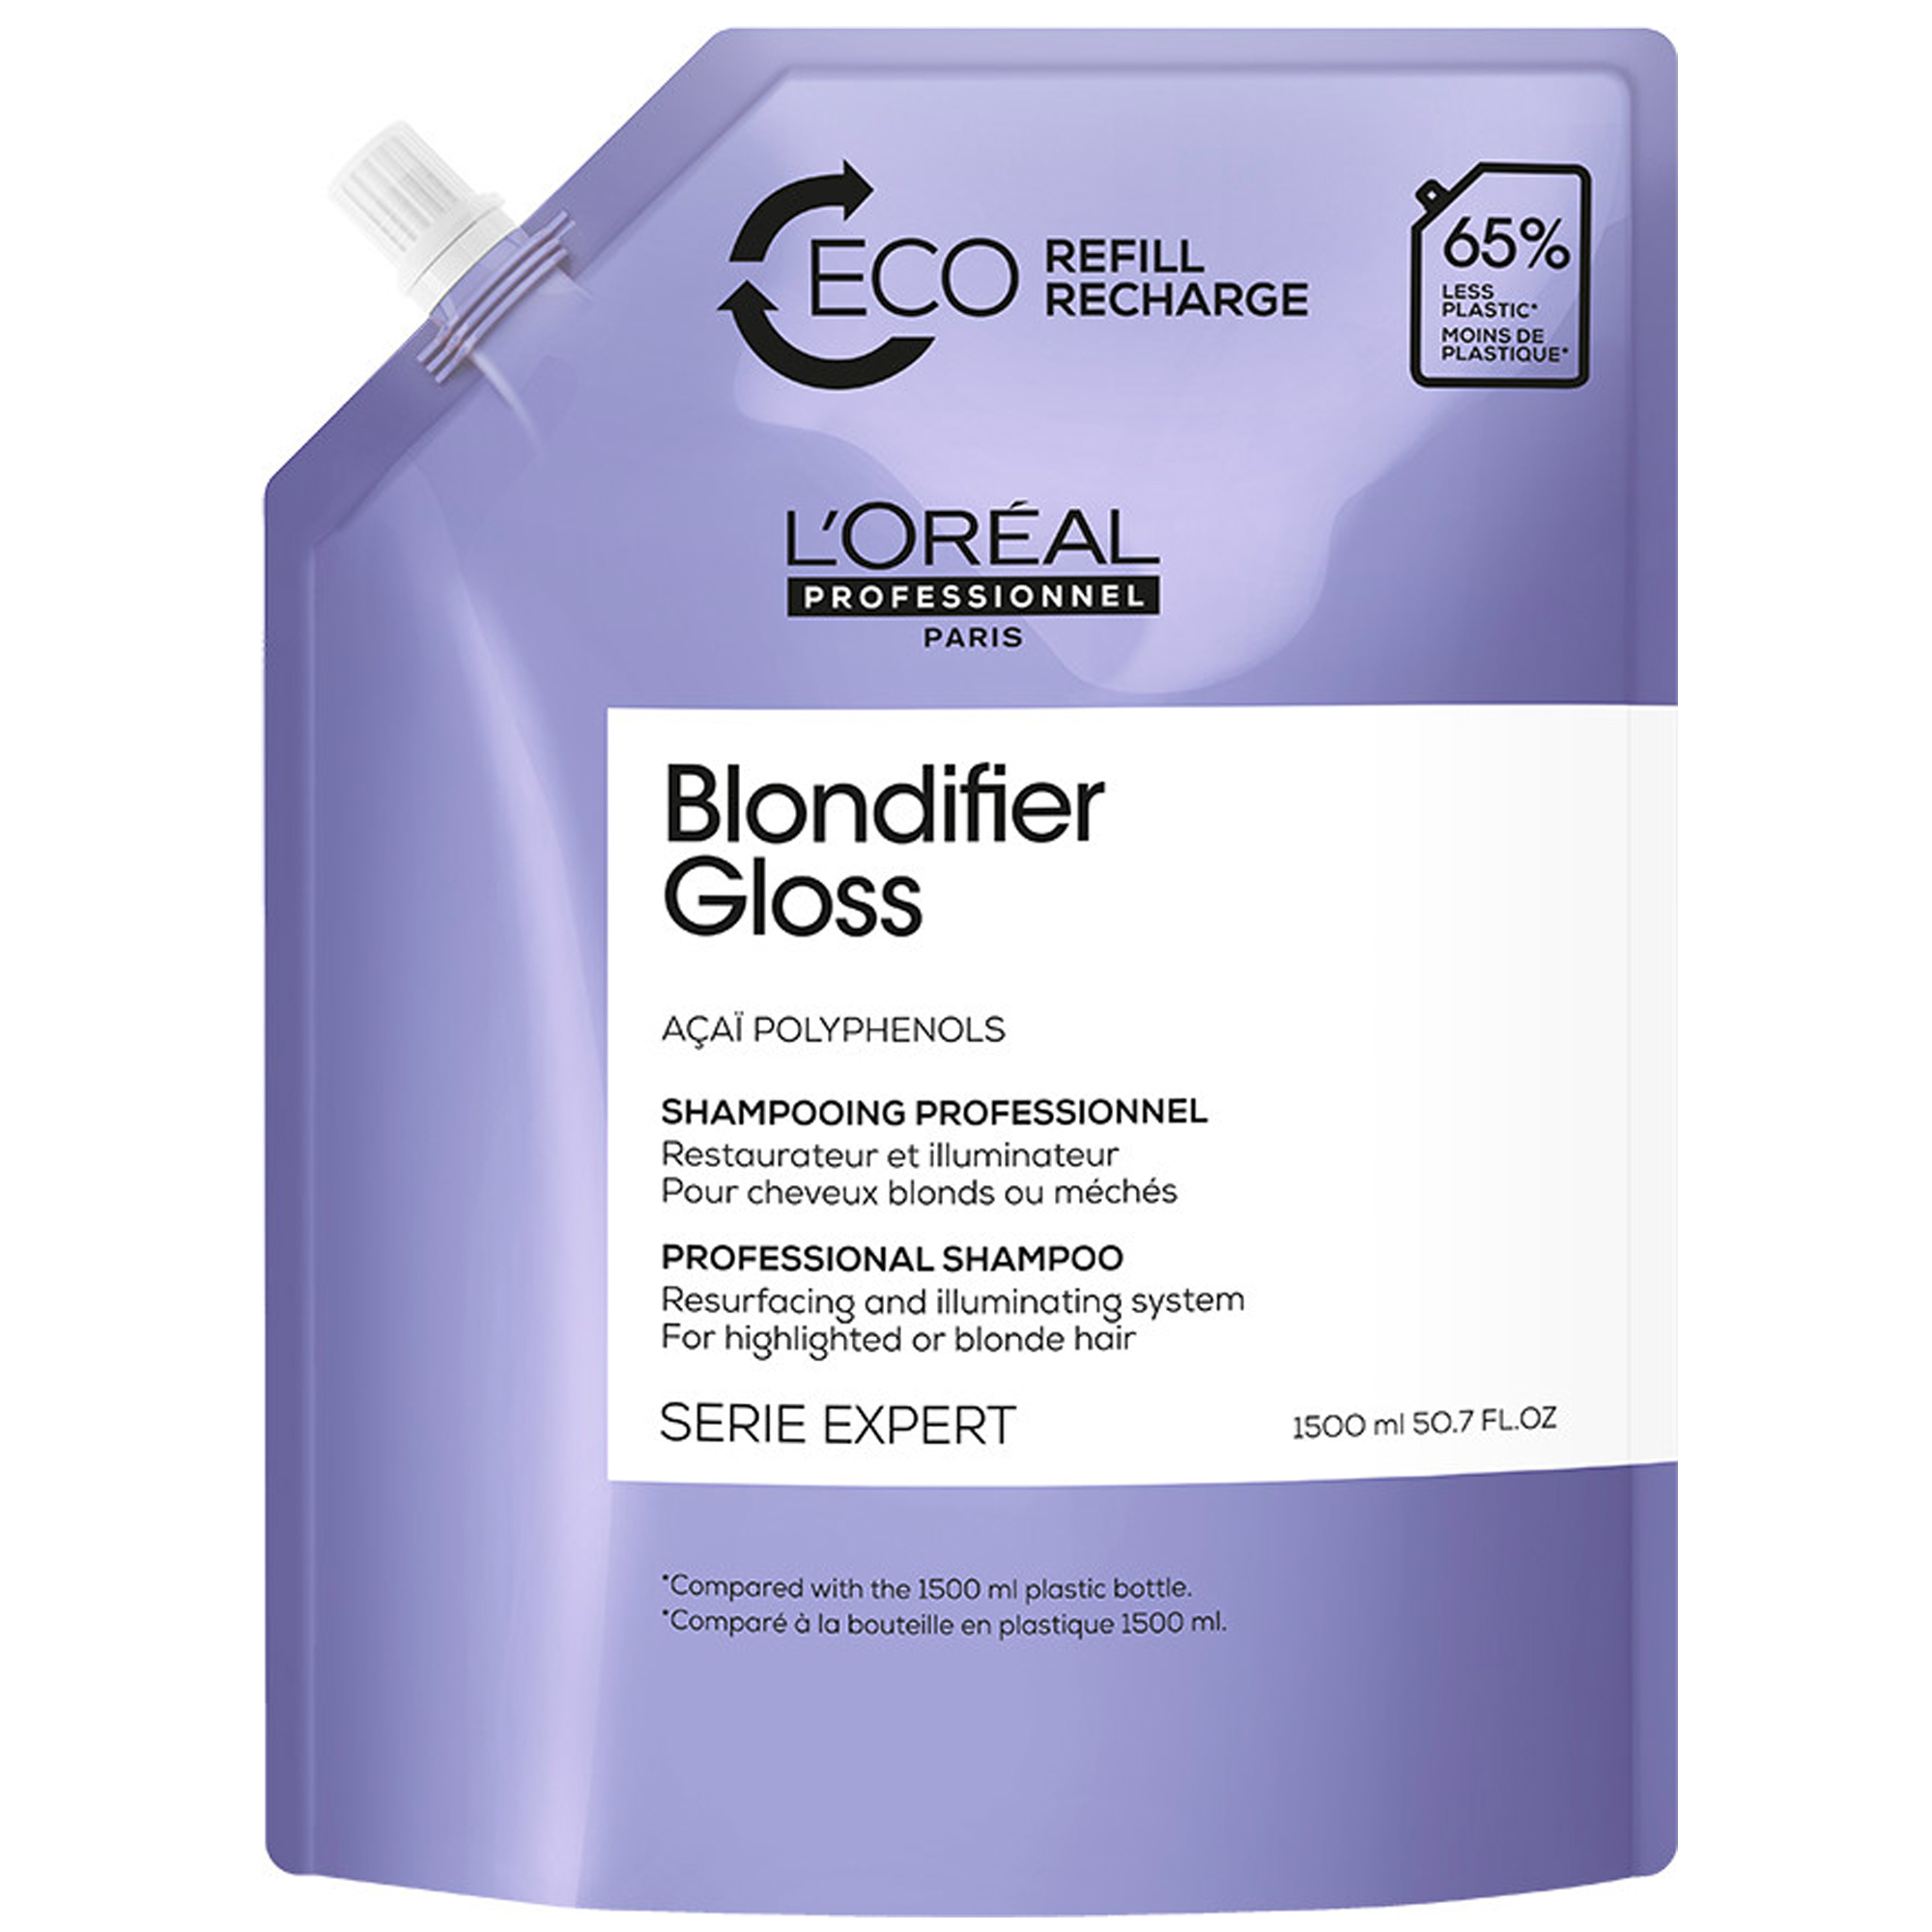 co-Recharge Shampoing Blondifier Gloss L'Oral Professionnel 1500 ML